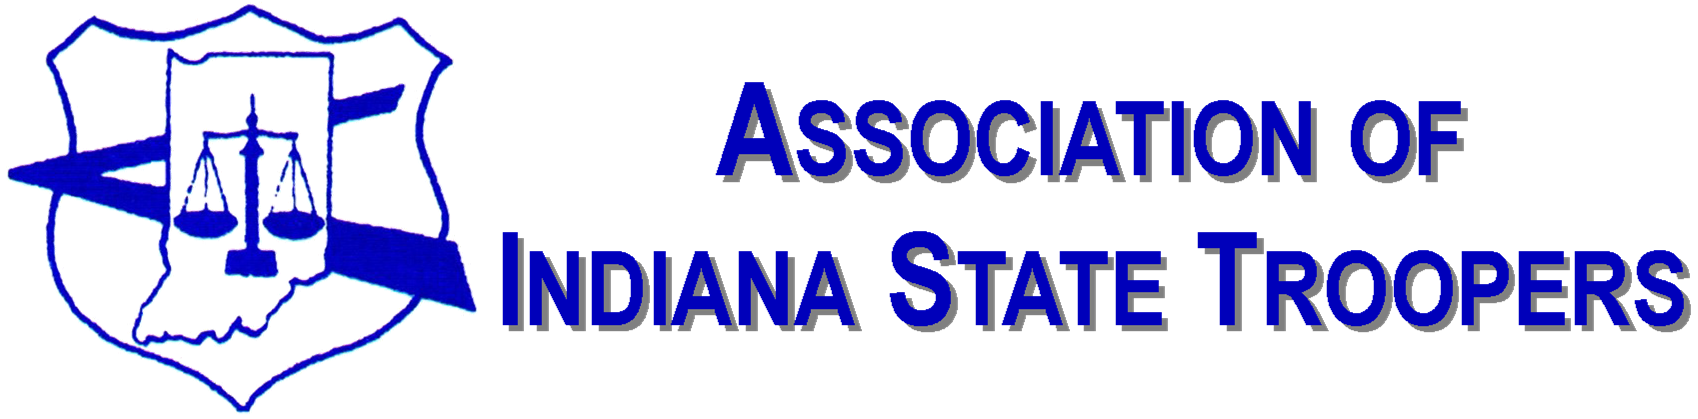 Association of Indiana State Troopers logo